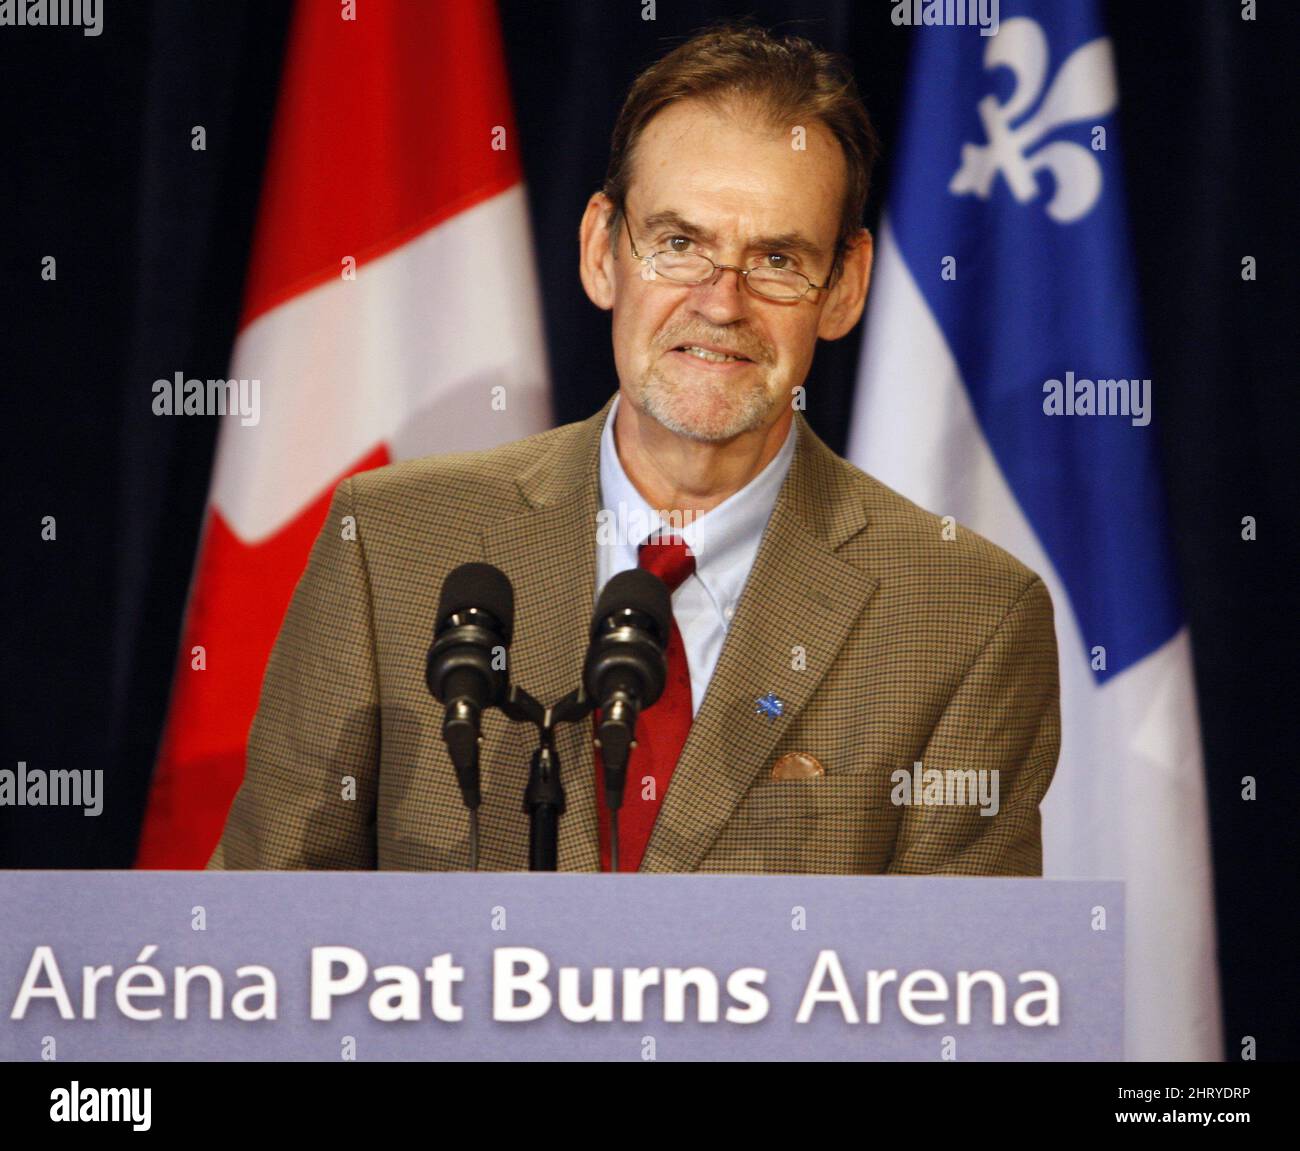 FILE - This March 26, 2010, file photo shows former NHL head coach Pat Burns during a news conference where a new arena was named after him, in Stanstead, Quebec. Pat Burns wants the world to know that he's still very much alive, despite reports and thousands of tweets suggesting otherwise. The former NHL coach, who is battling cancer, called TSN hockey columnist Bob McKenzie on Friday, Sept. 17, 2010, after seeing reports of his death at age 58. (AP Photo/The Canadian Press, Ryan Remiorz, File) Stock Photo